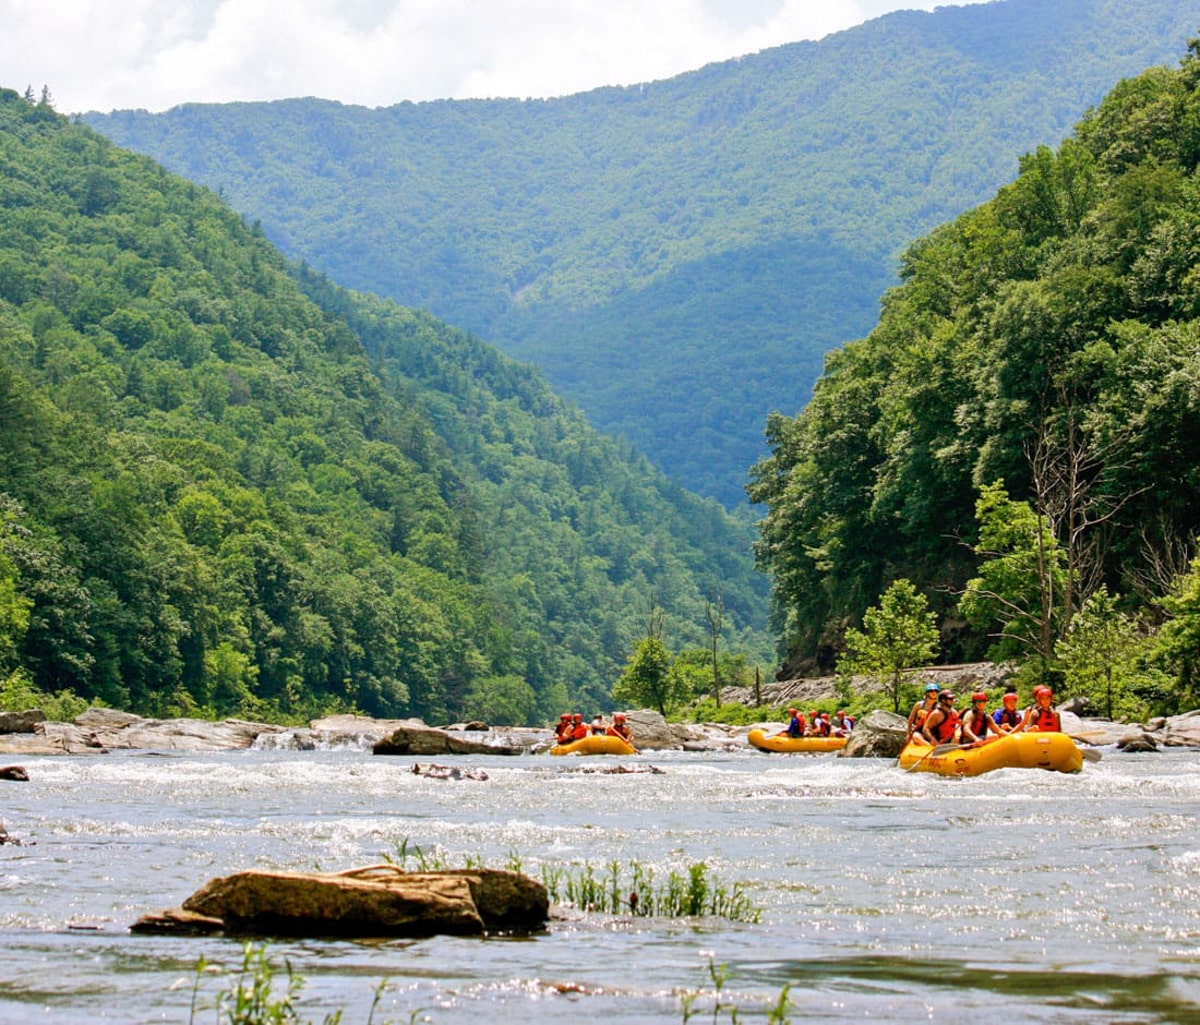 Many groups of people white water rafting down the Nolichucky River with appalachian mountains in the background